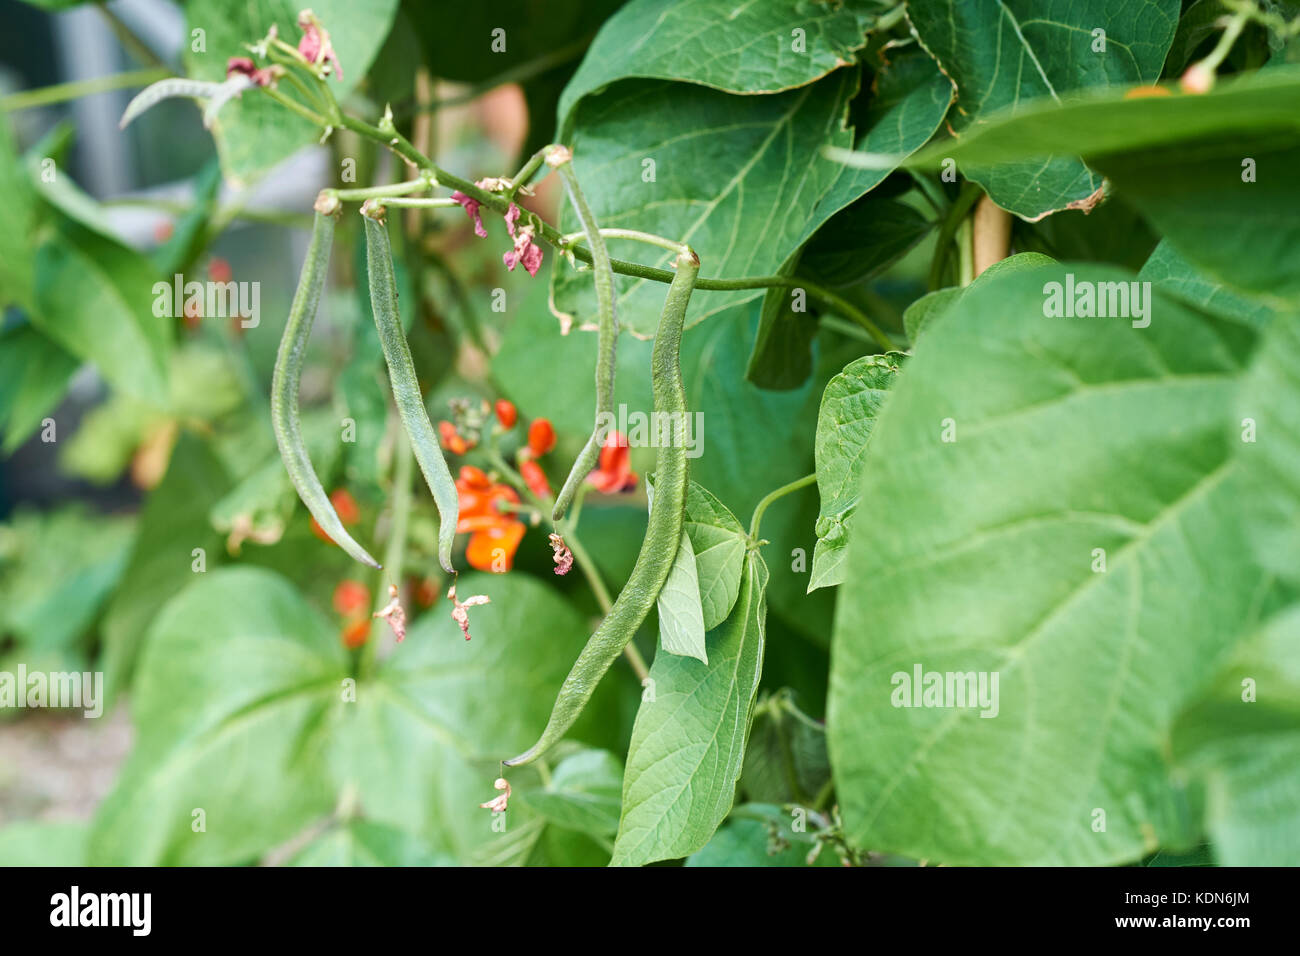 Runner Bean plants, Enorma, with green beans and red flowers growing up bamboo canes in a vegetable garden, UK. Stock Photo